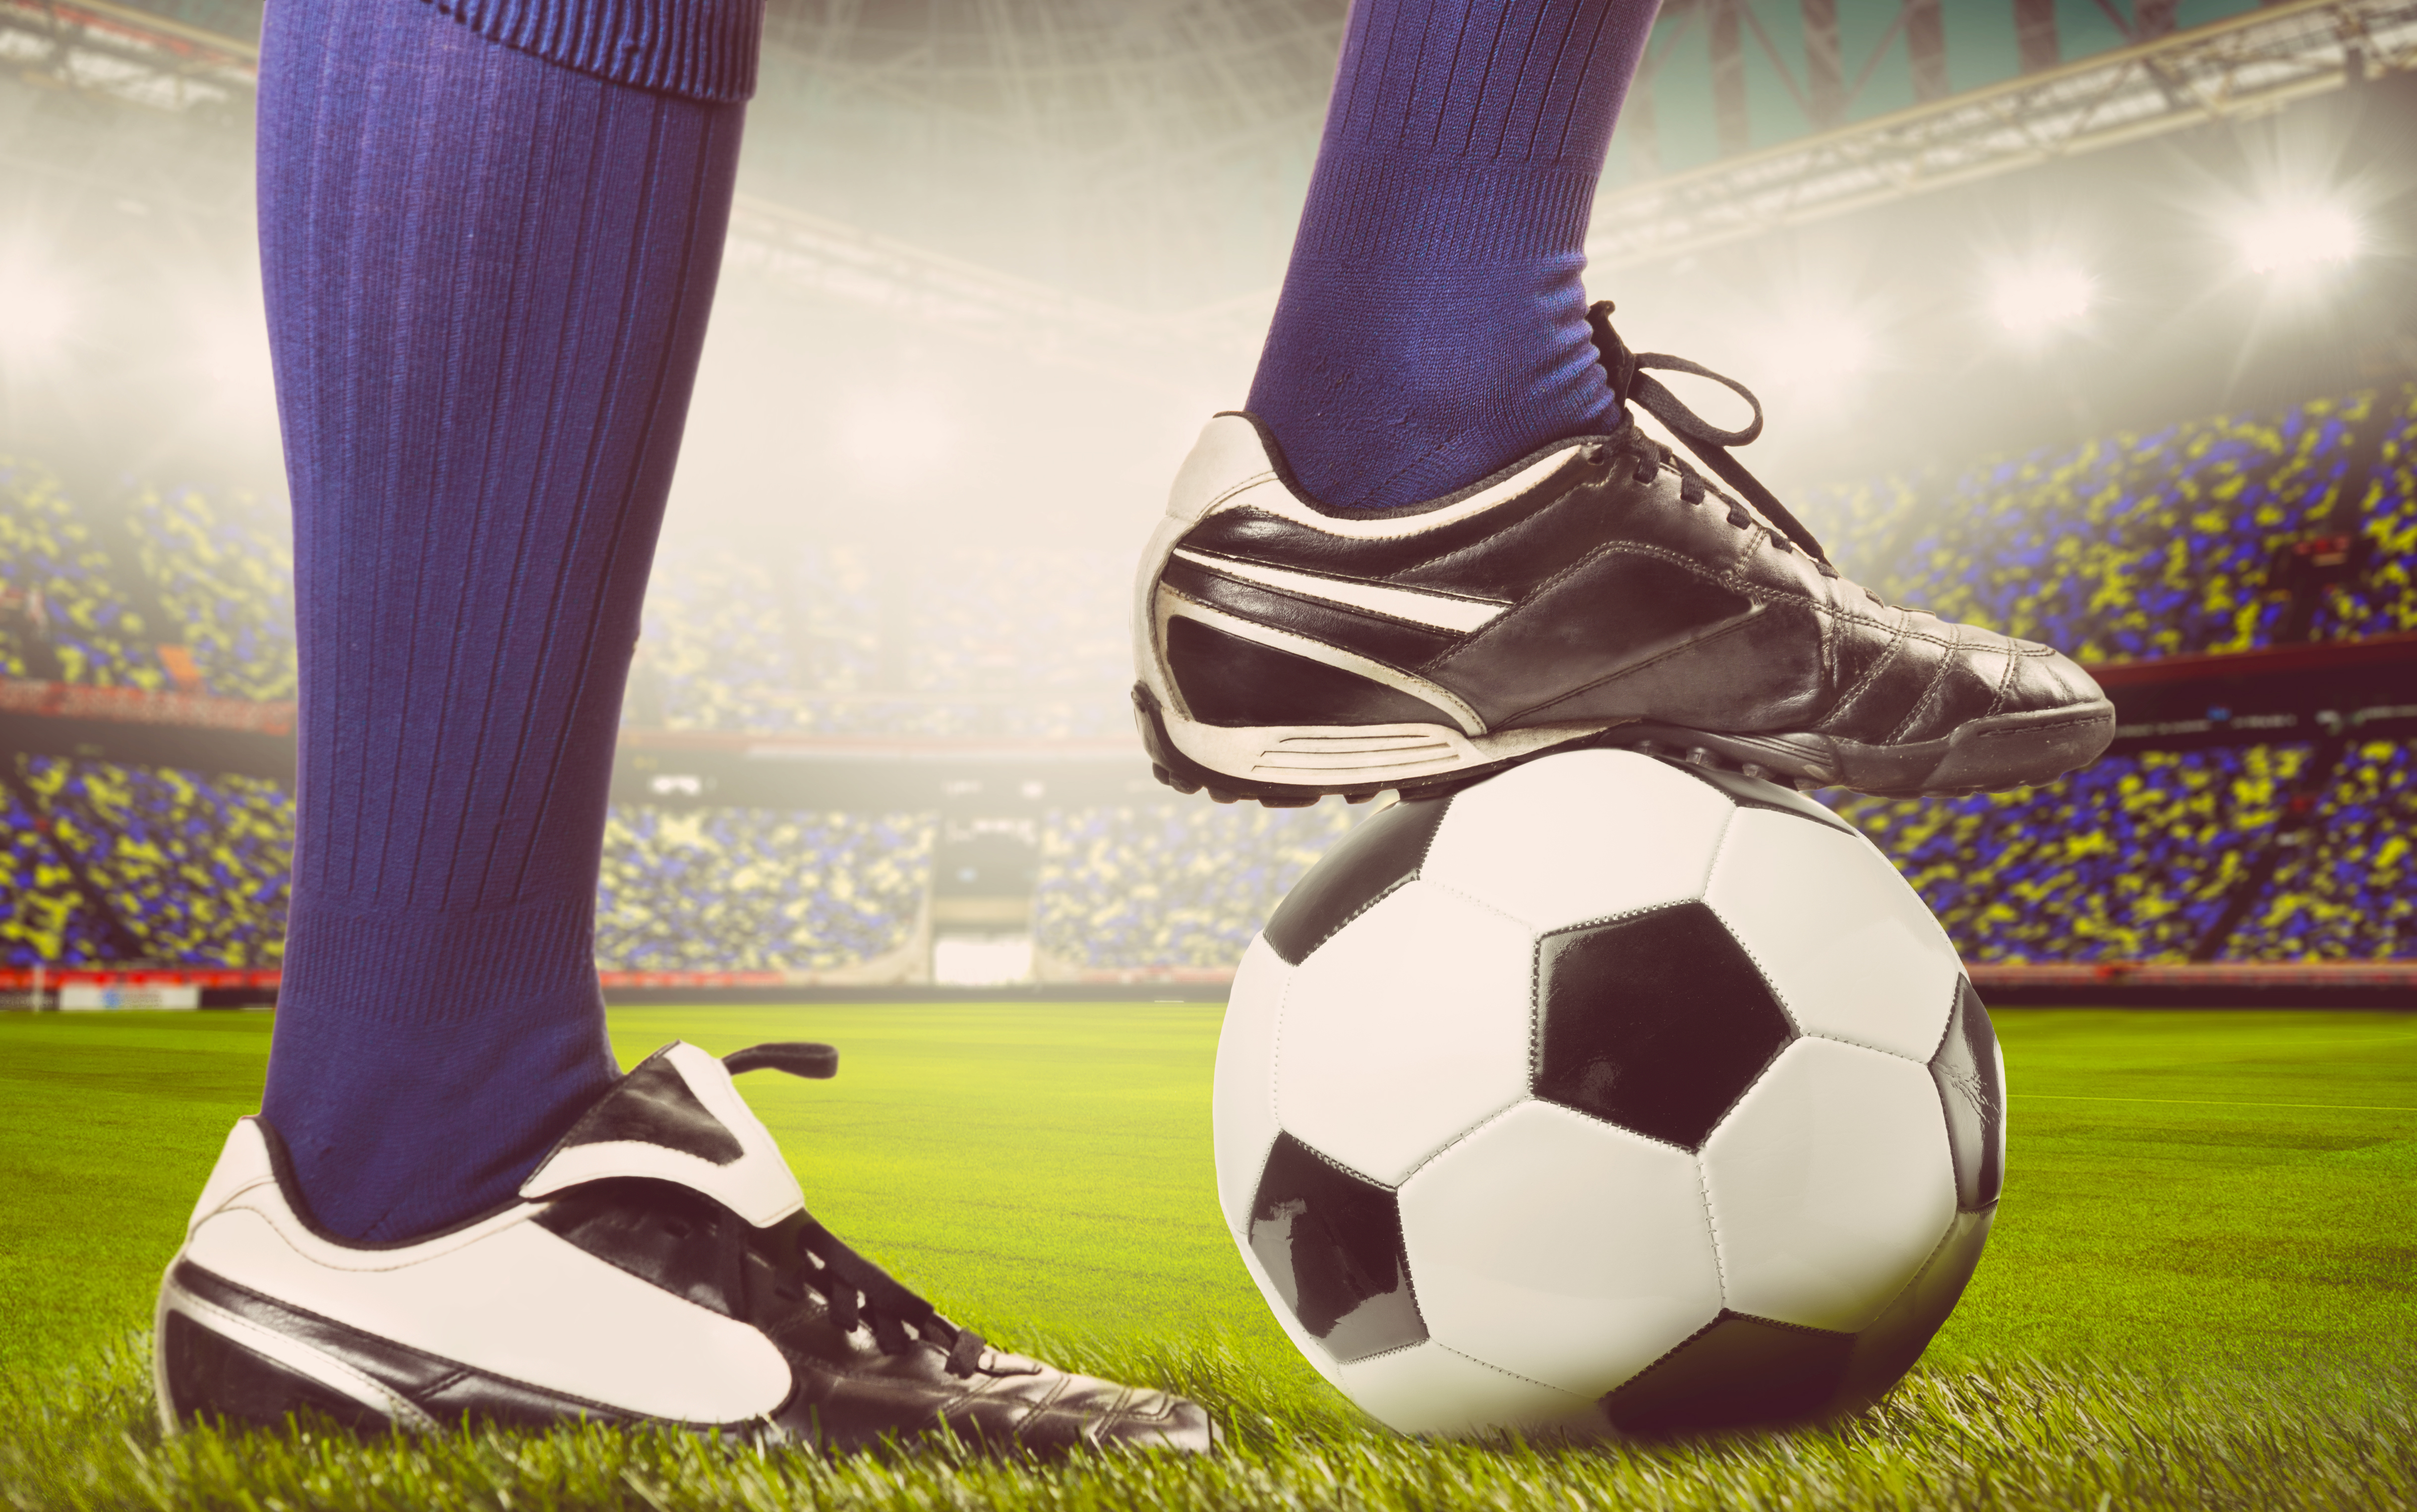 legs of a soccer or football player on ball on stadium, warm colors toned